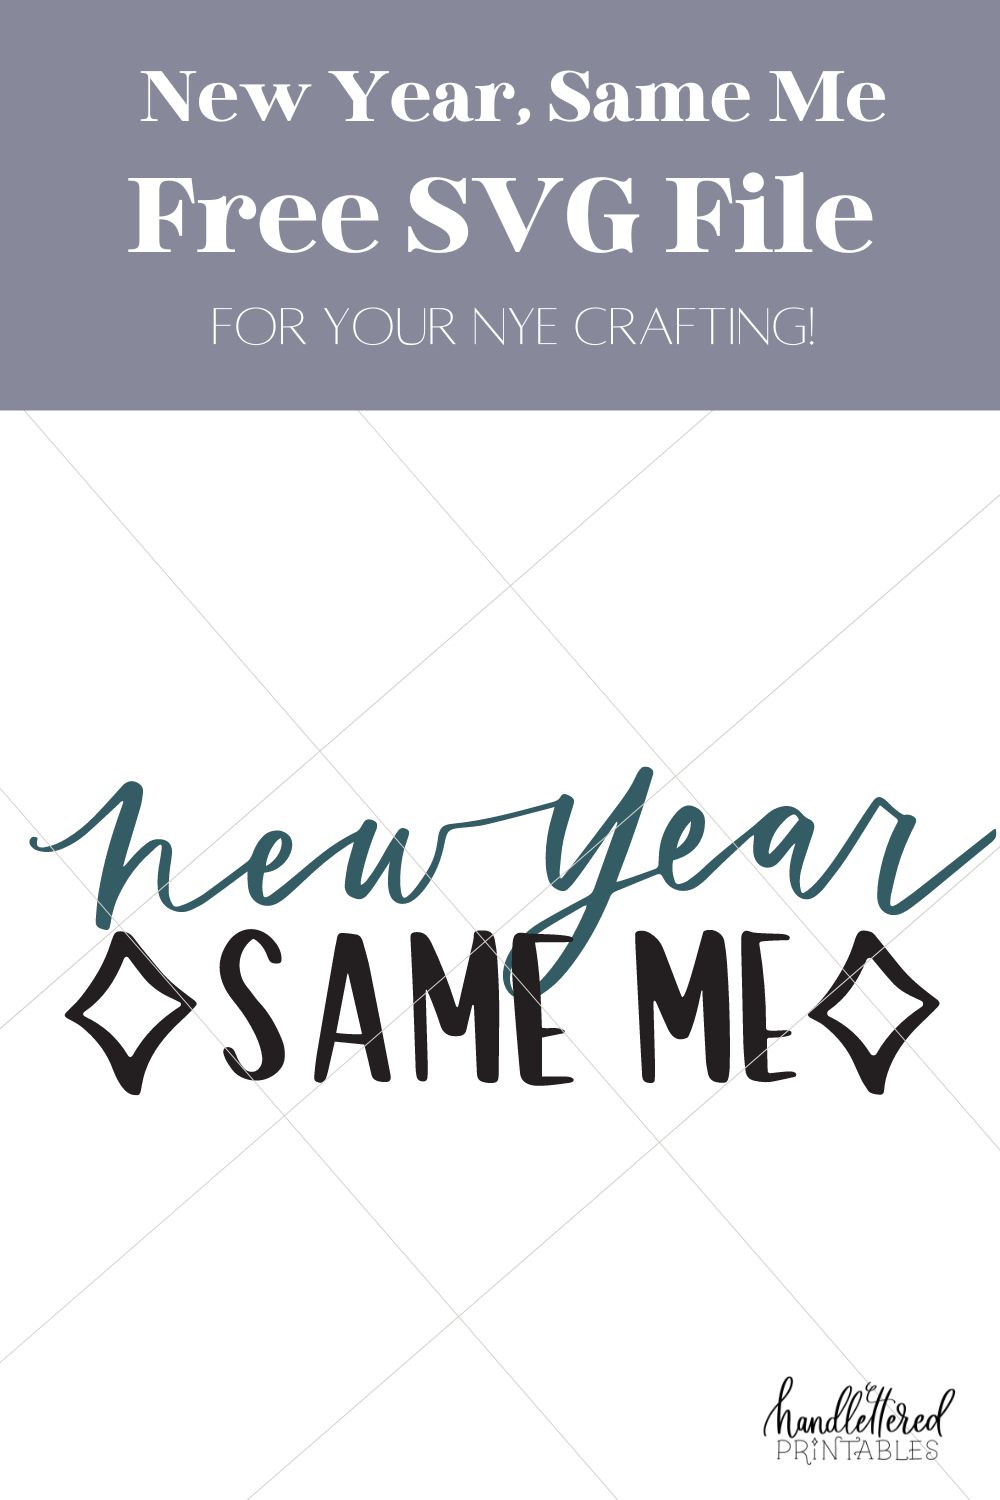 New Year New Me- Free Hand Lettered SVG File for cricut crafting (design on white background with text title)